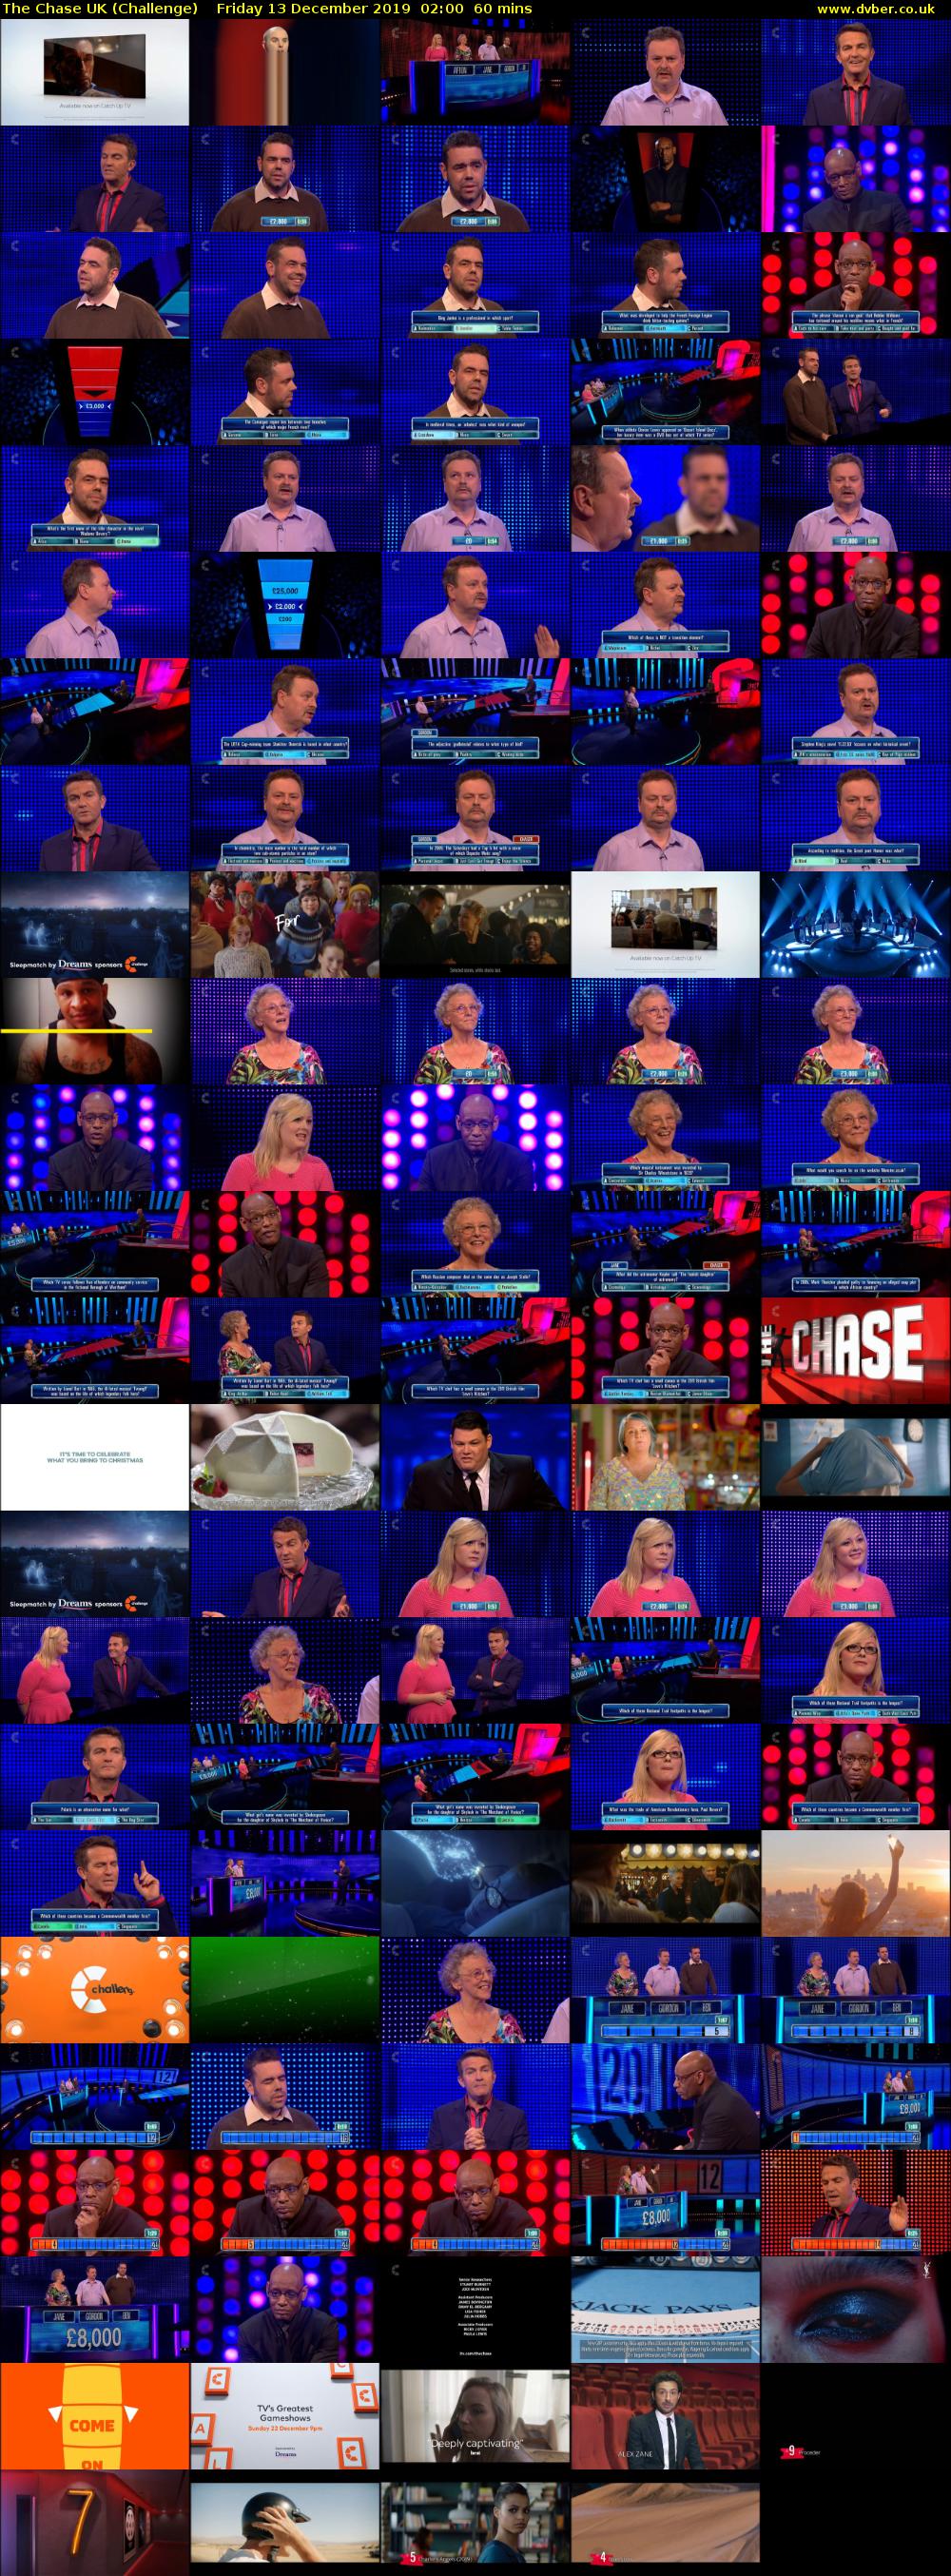 The Chase UK (Challenge) Friday 13 December 2019 02:00 - 03:00